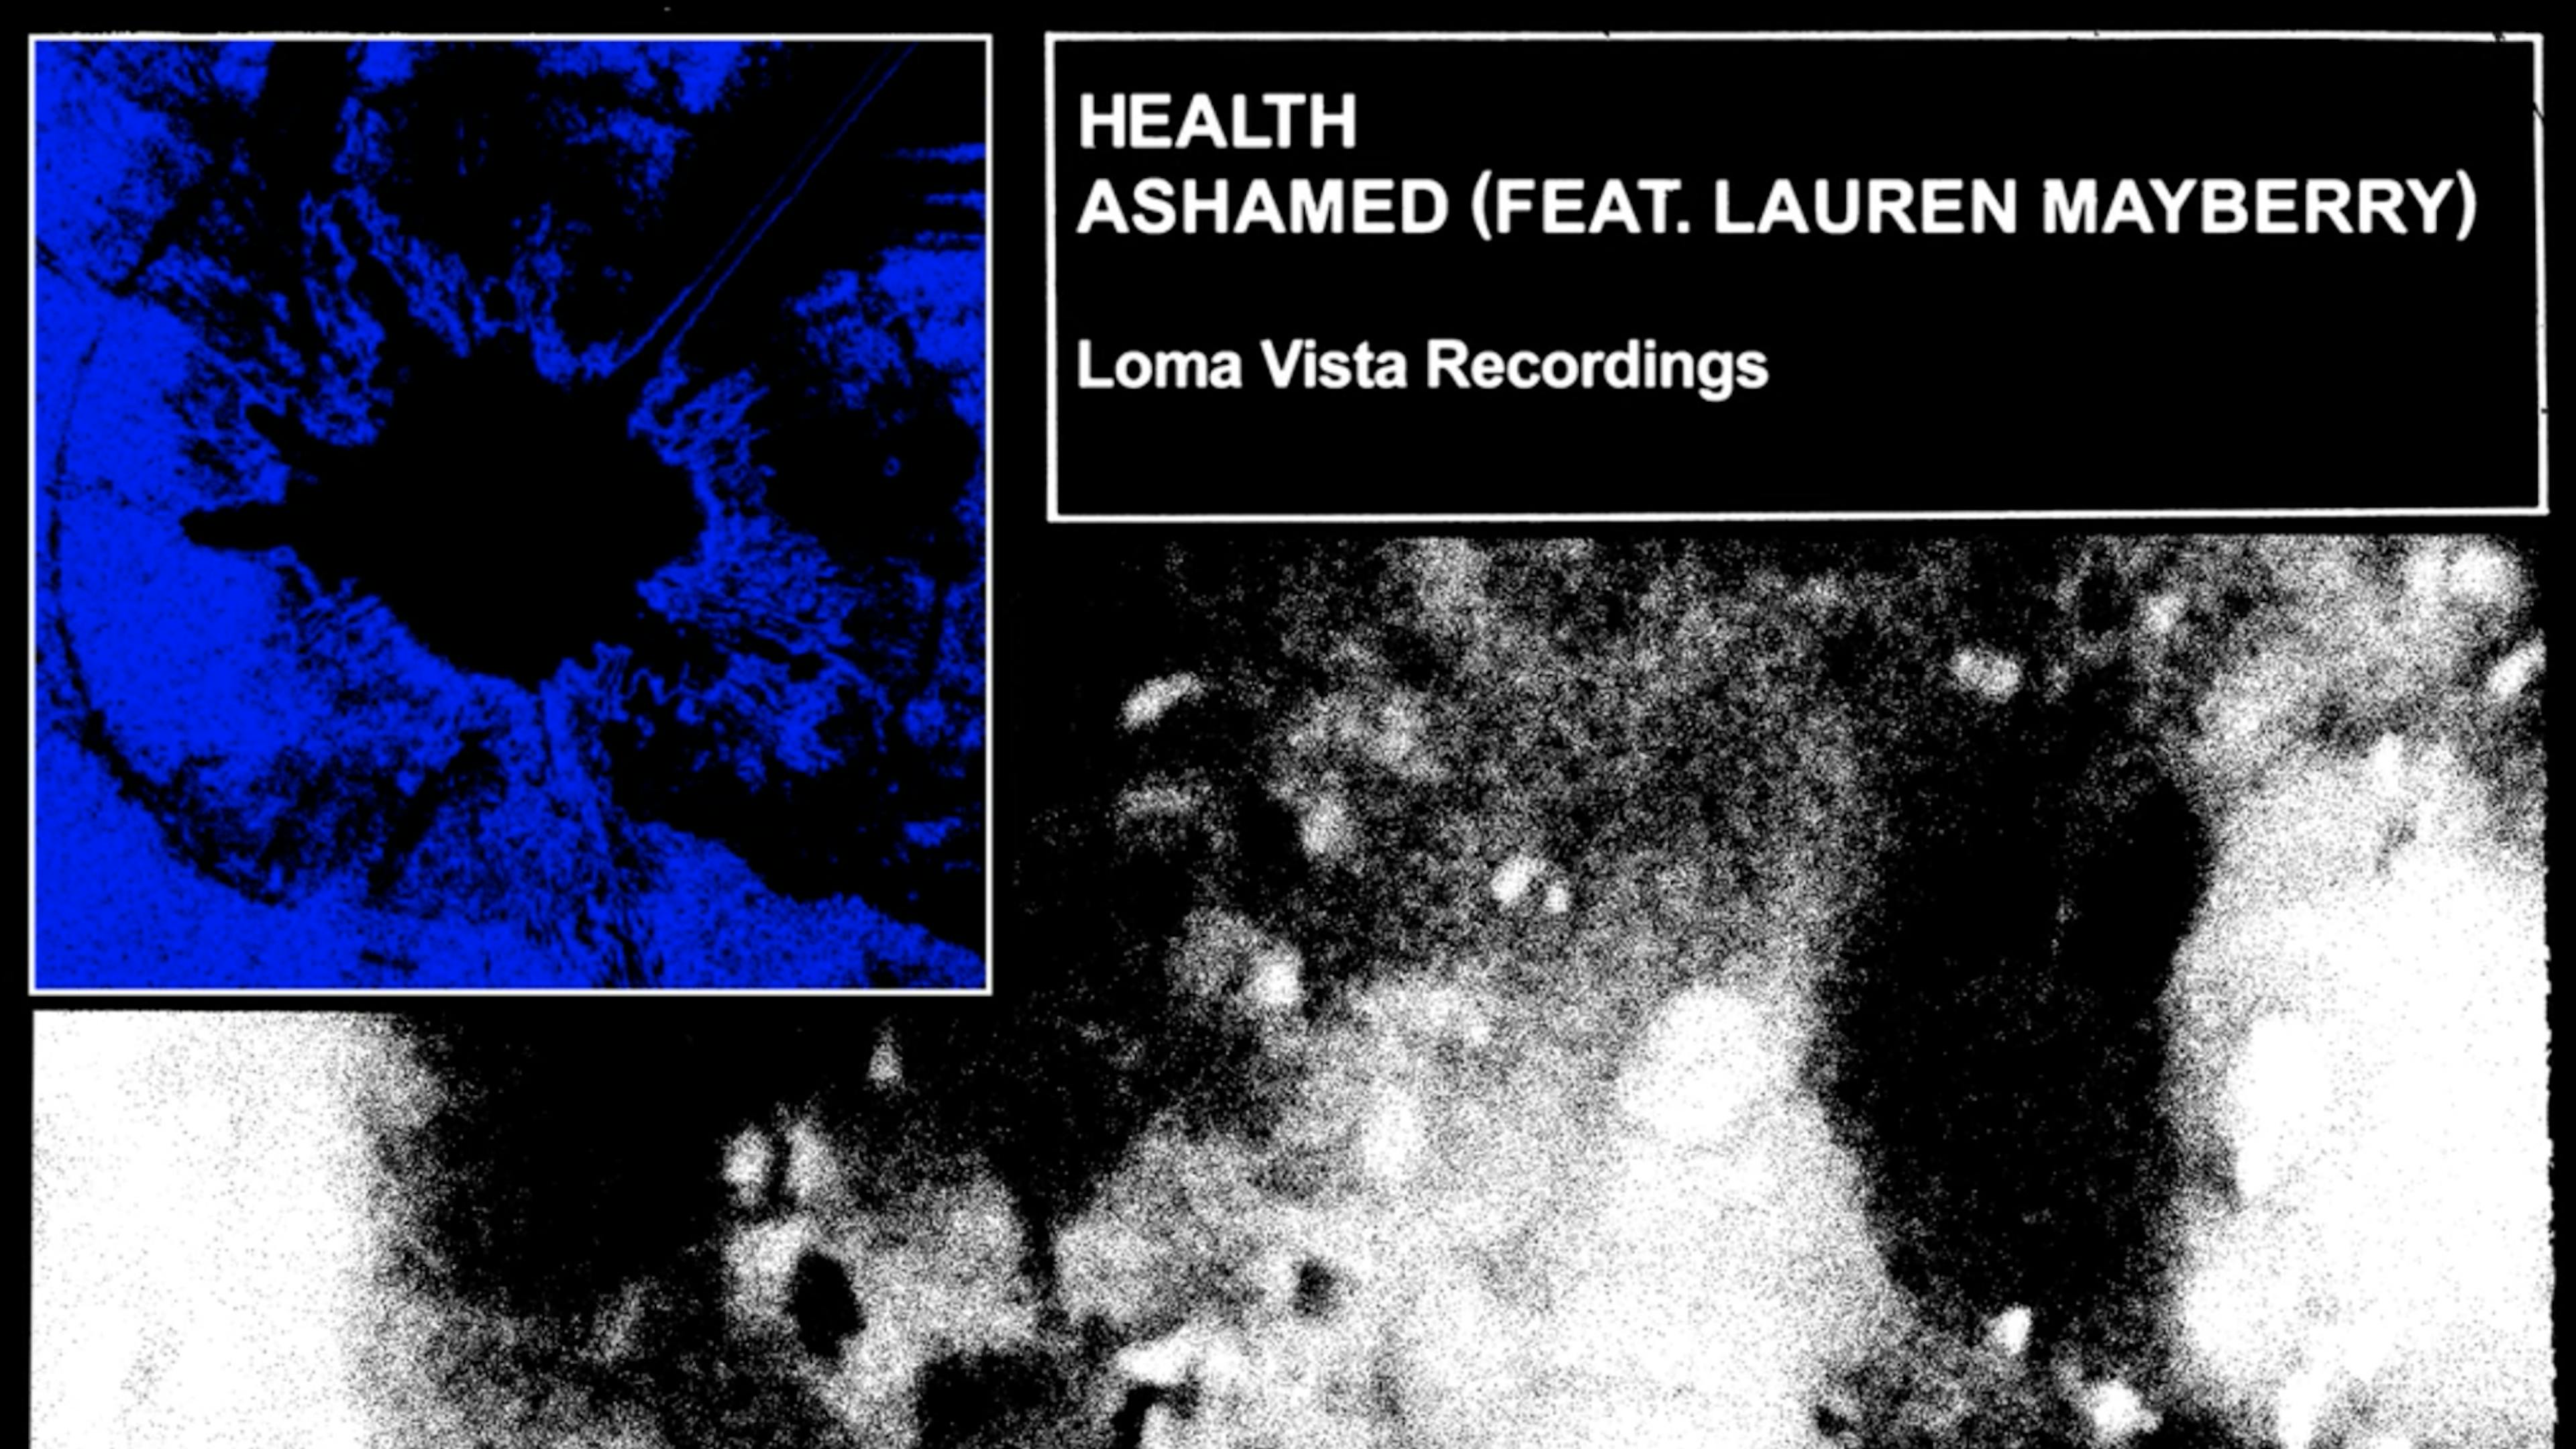 HEALTH team up with CHVRCHES’ Lauren Mayberry for new collab